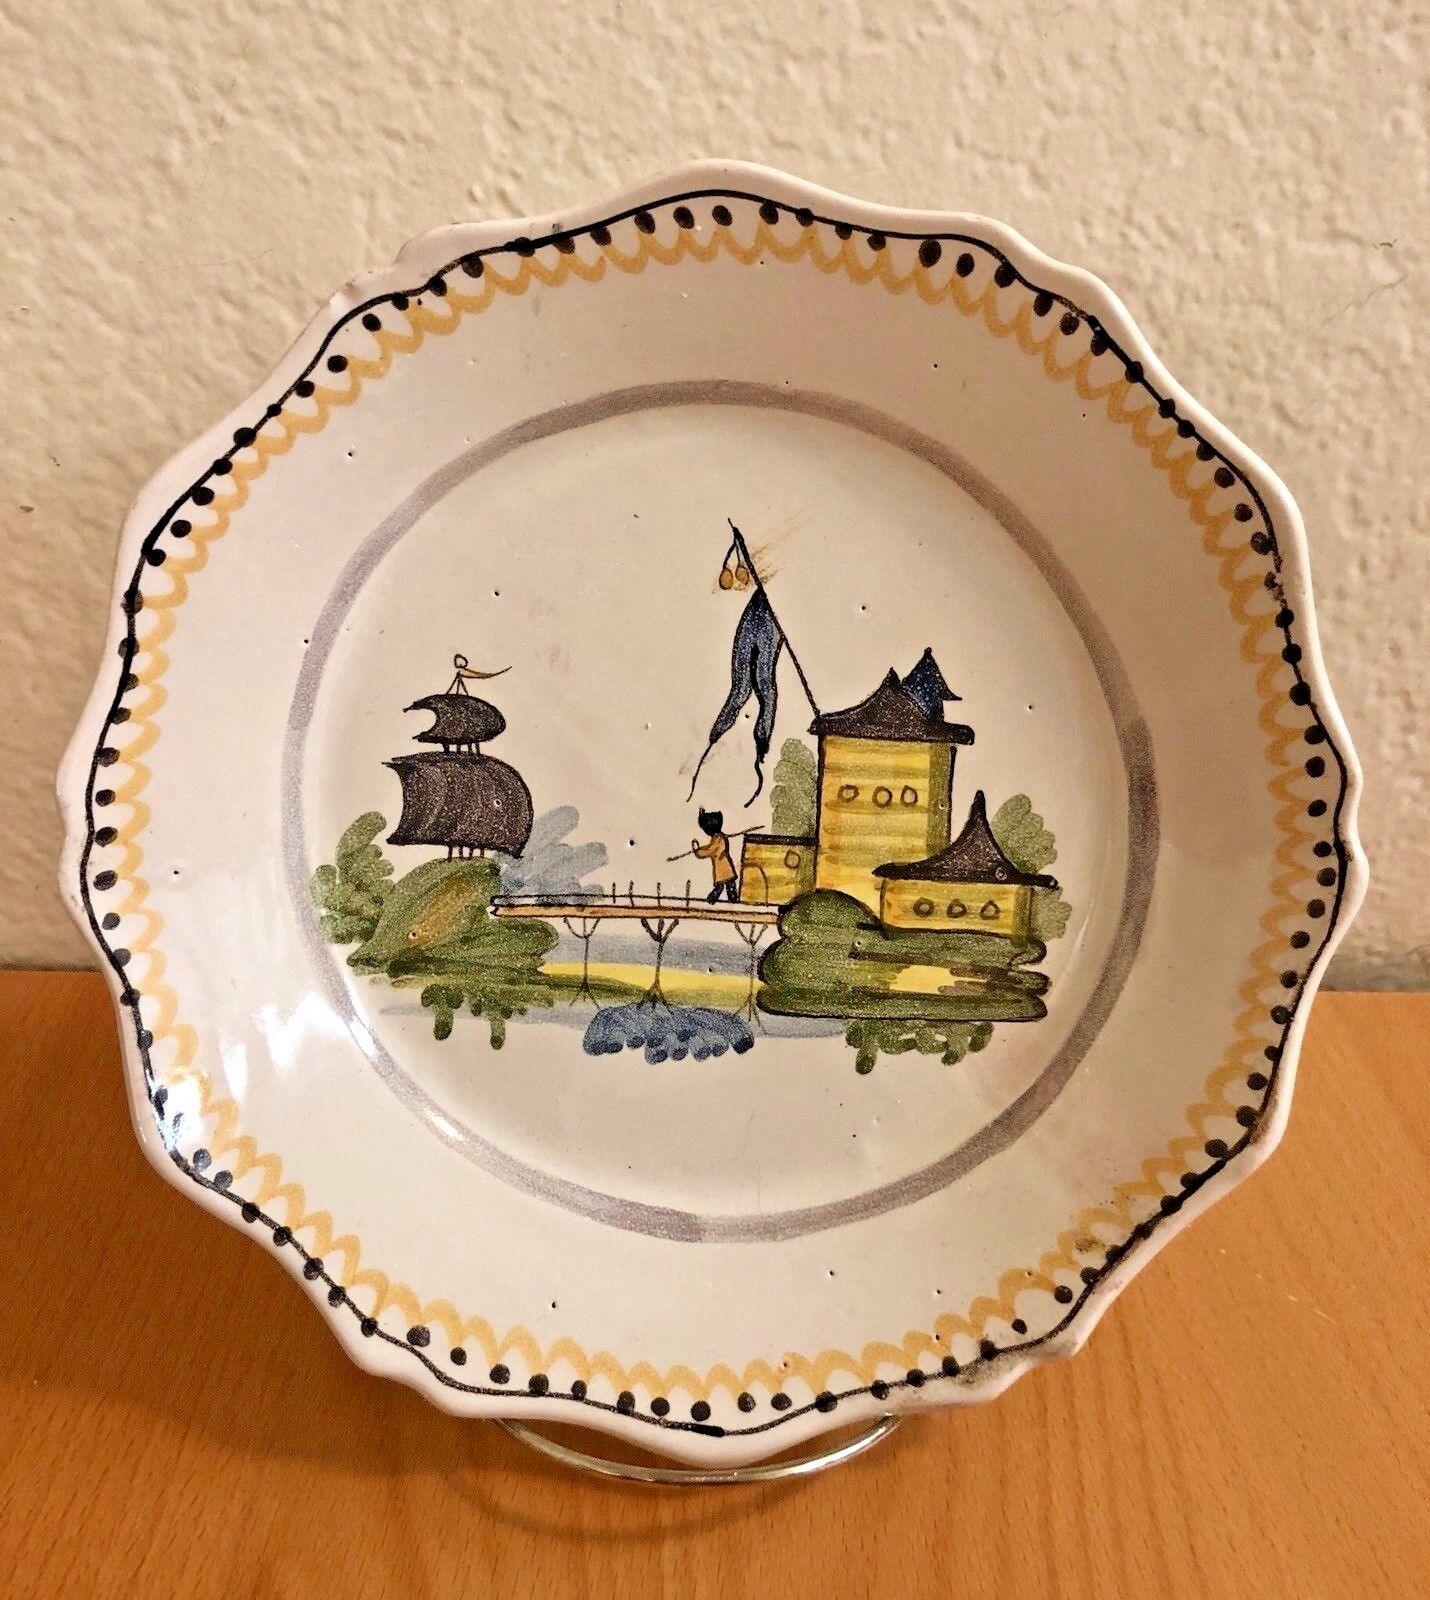 Antique FRENCH FAIENCE PLATE NEVERS, man ship & bridge.